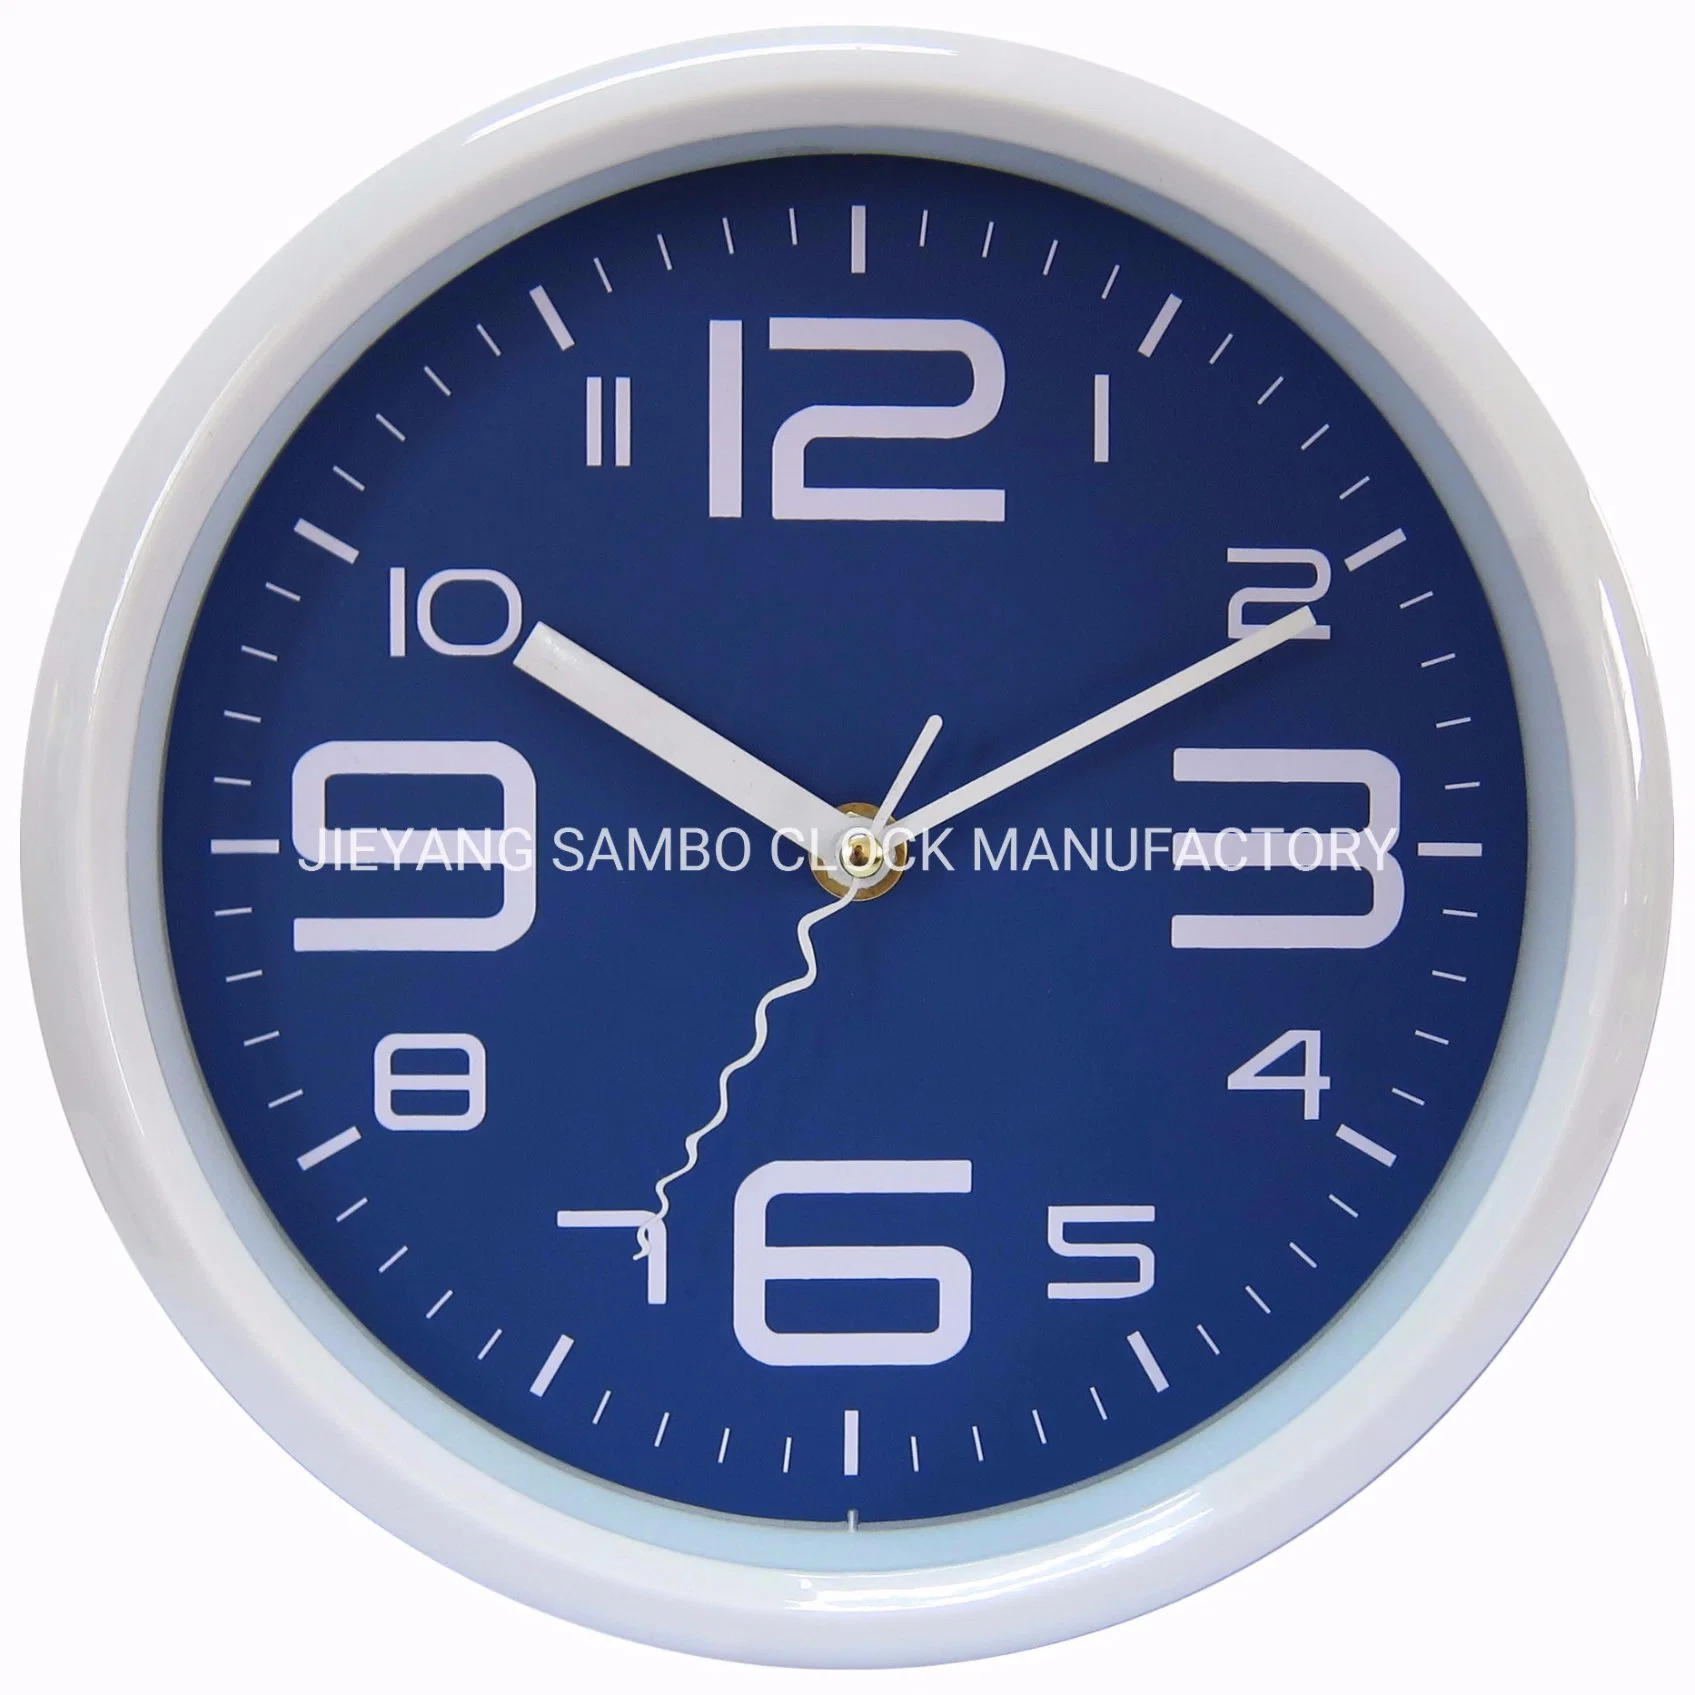 Round Digital Clock for Exporting